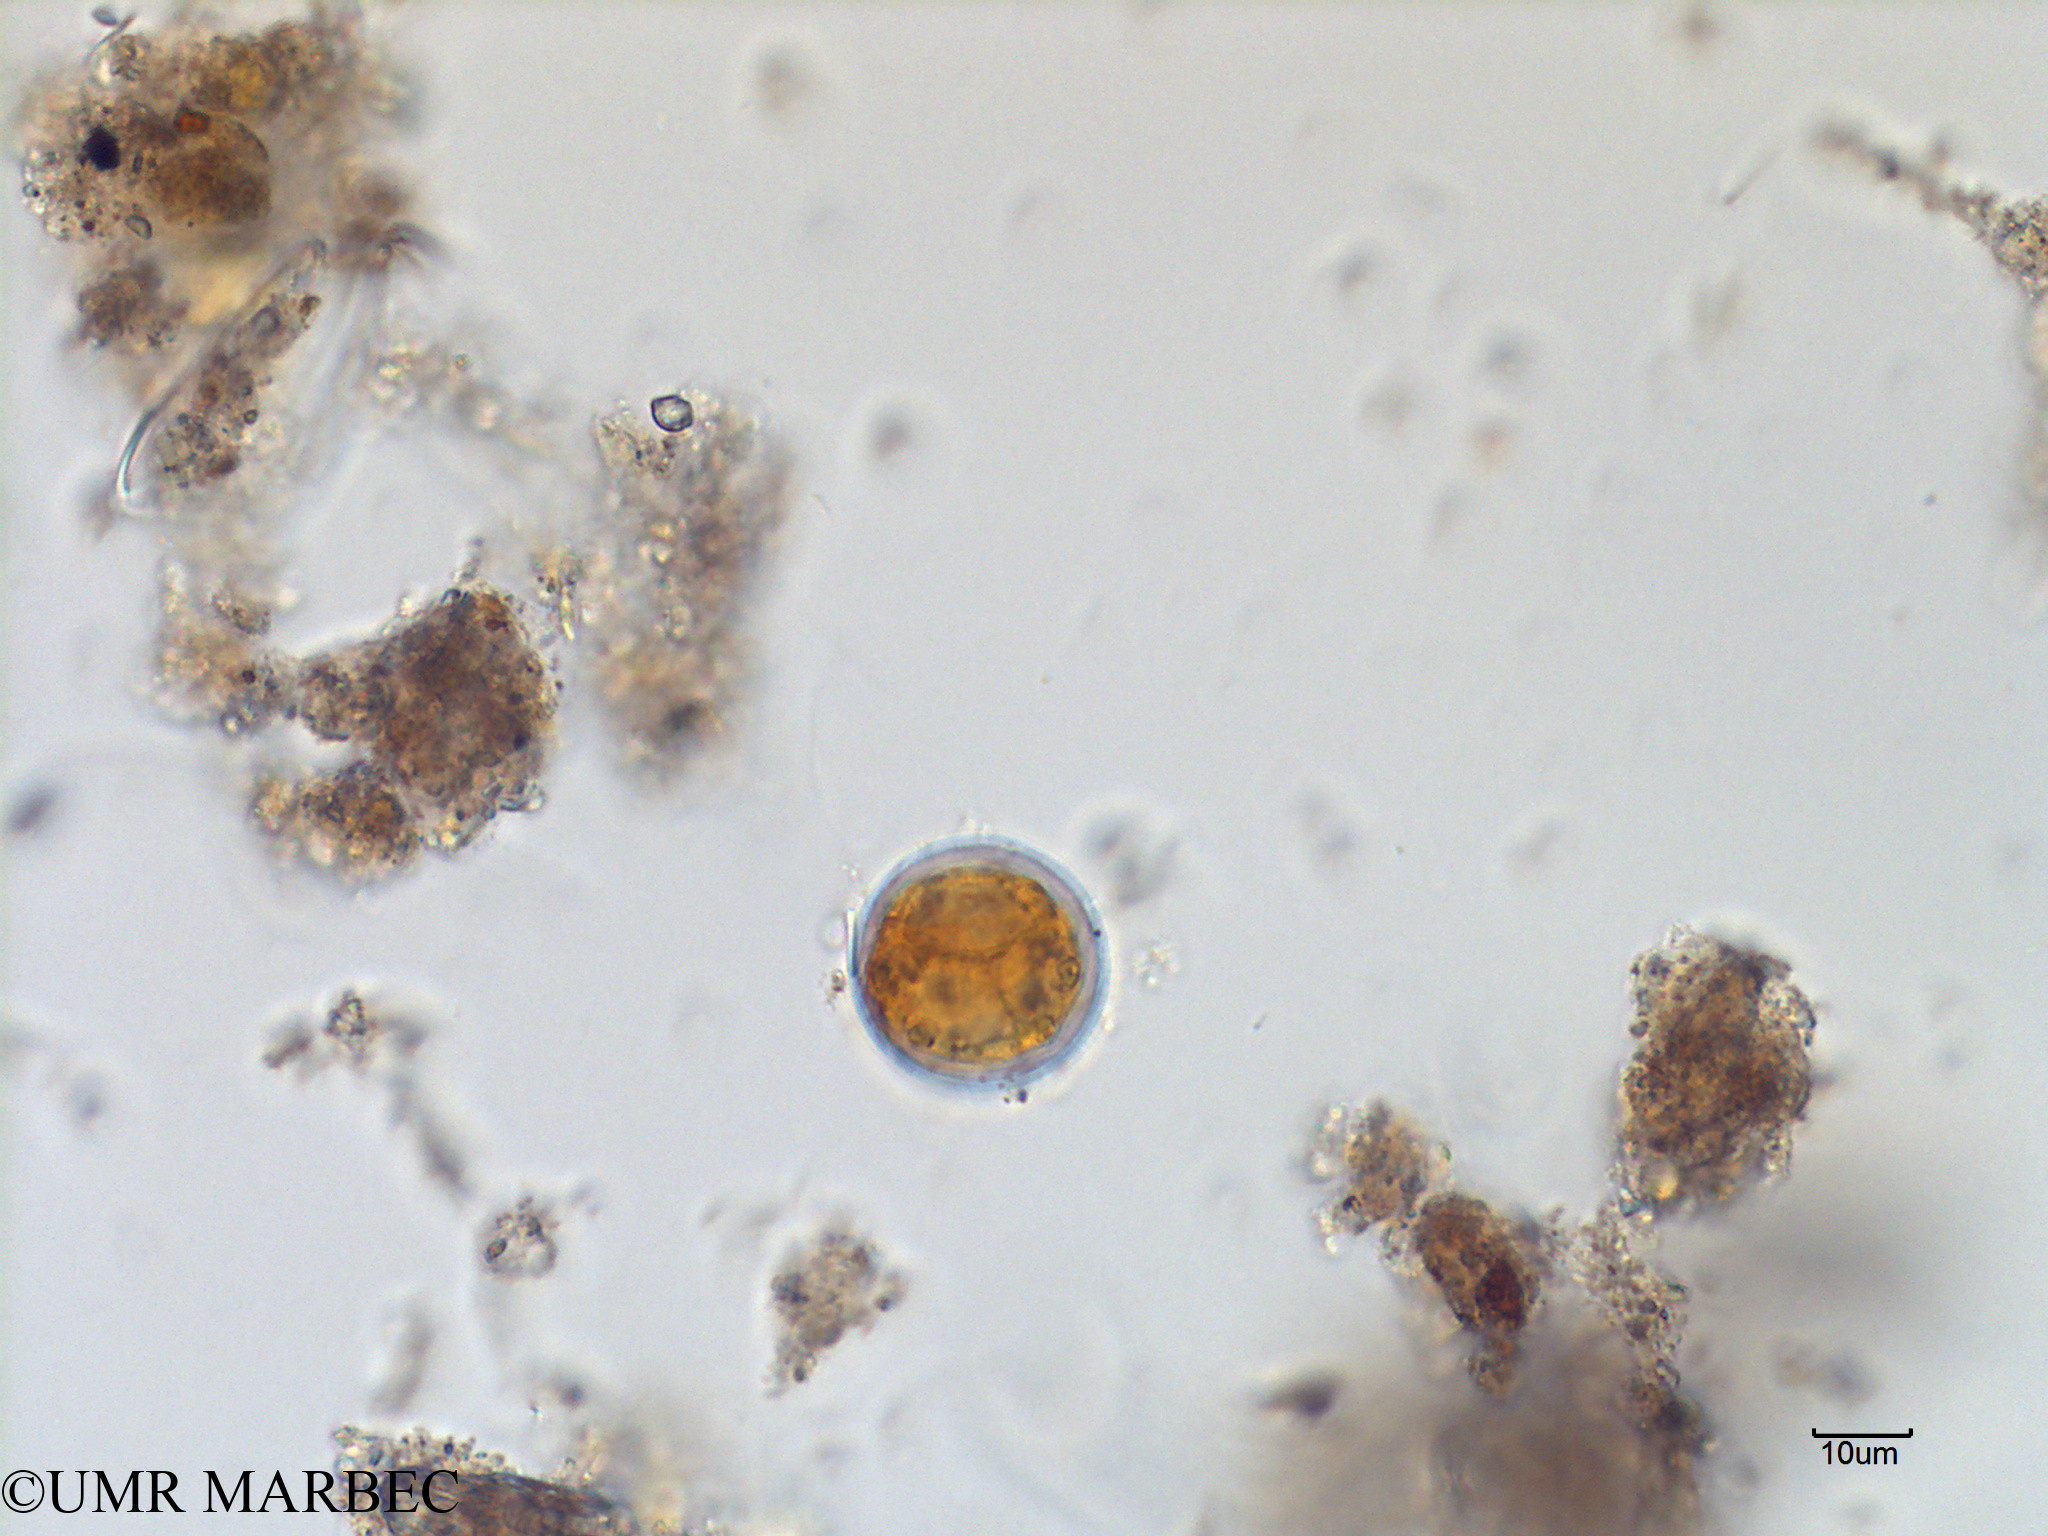 phyto/Scattered_Islands/mayotte_lagoon/SIREME May 2016/Protoperidinium sp42 (MAY4_proto lequel c-7).tif(copy).jpg